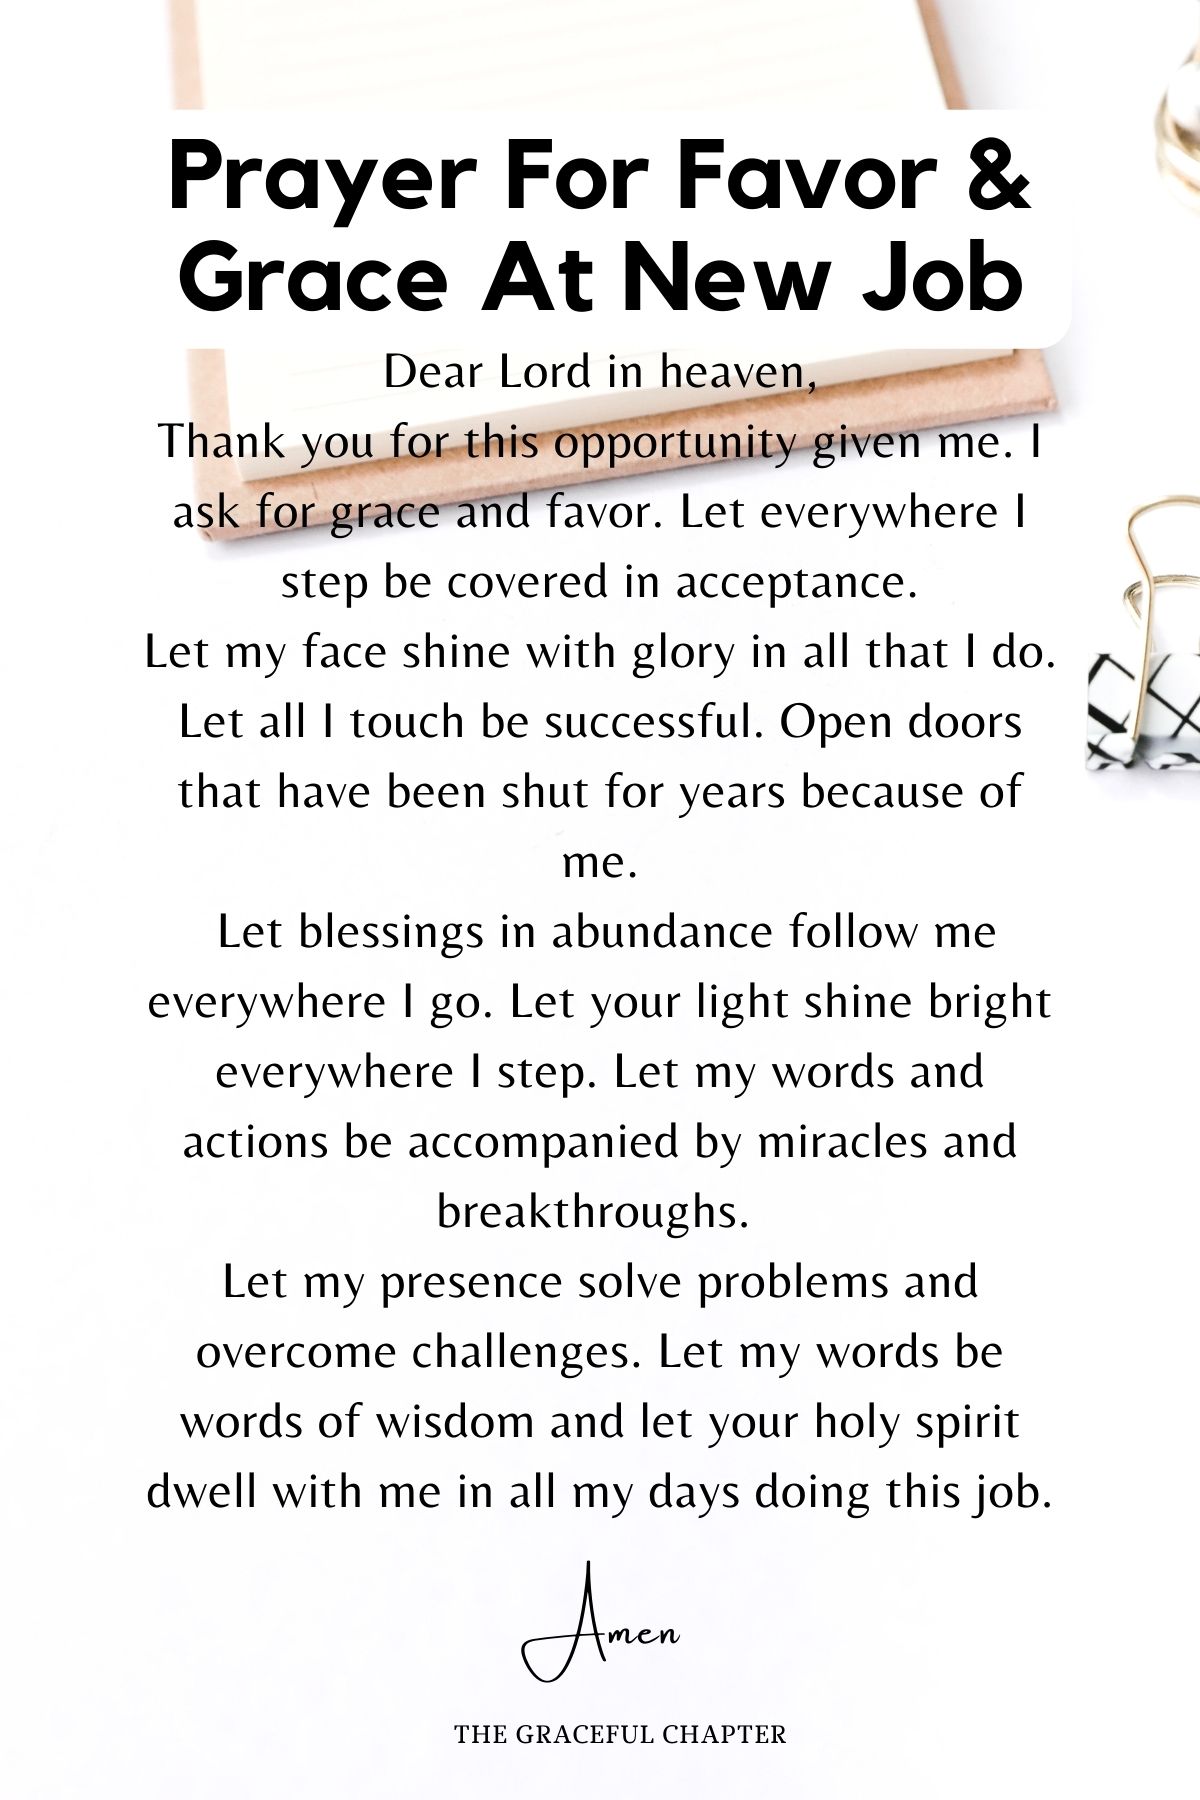 Prayer for favor and grace at new job